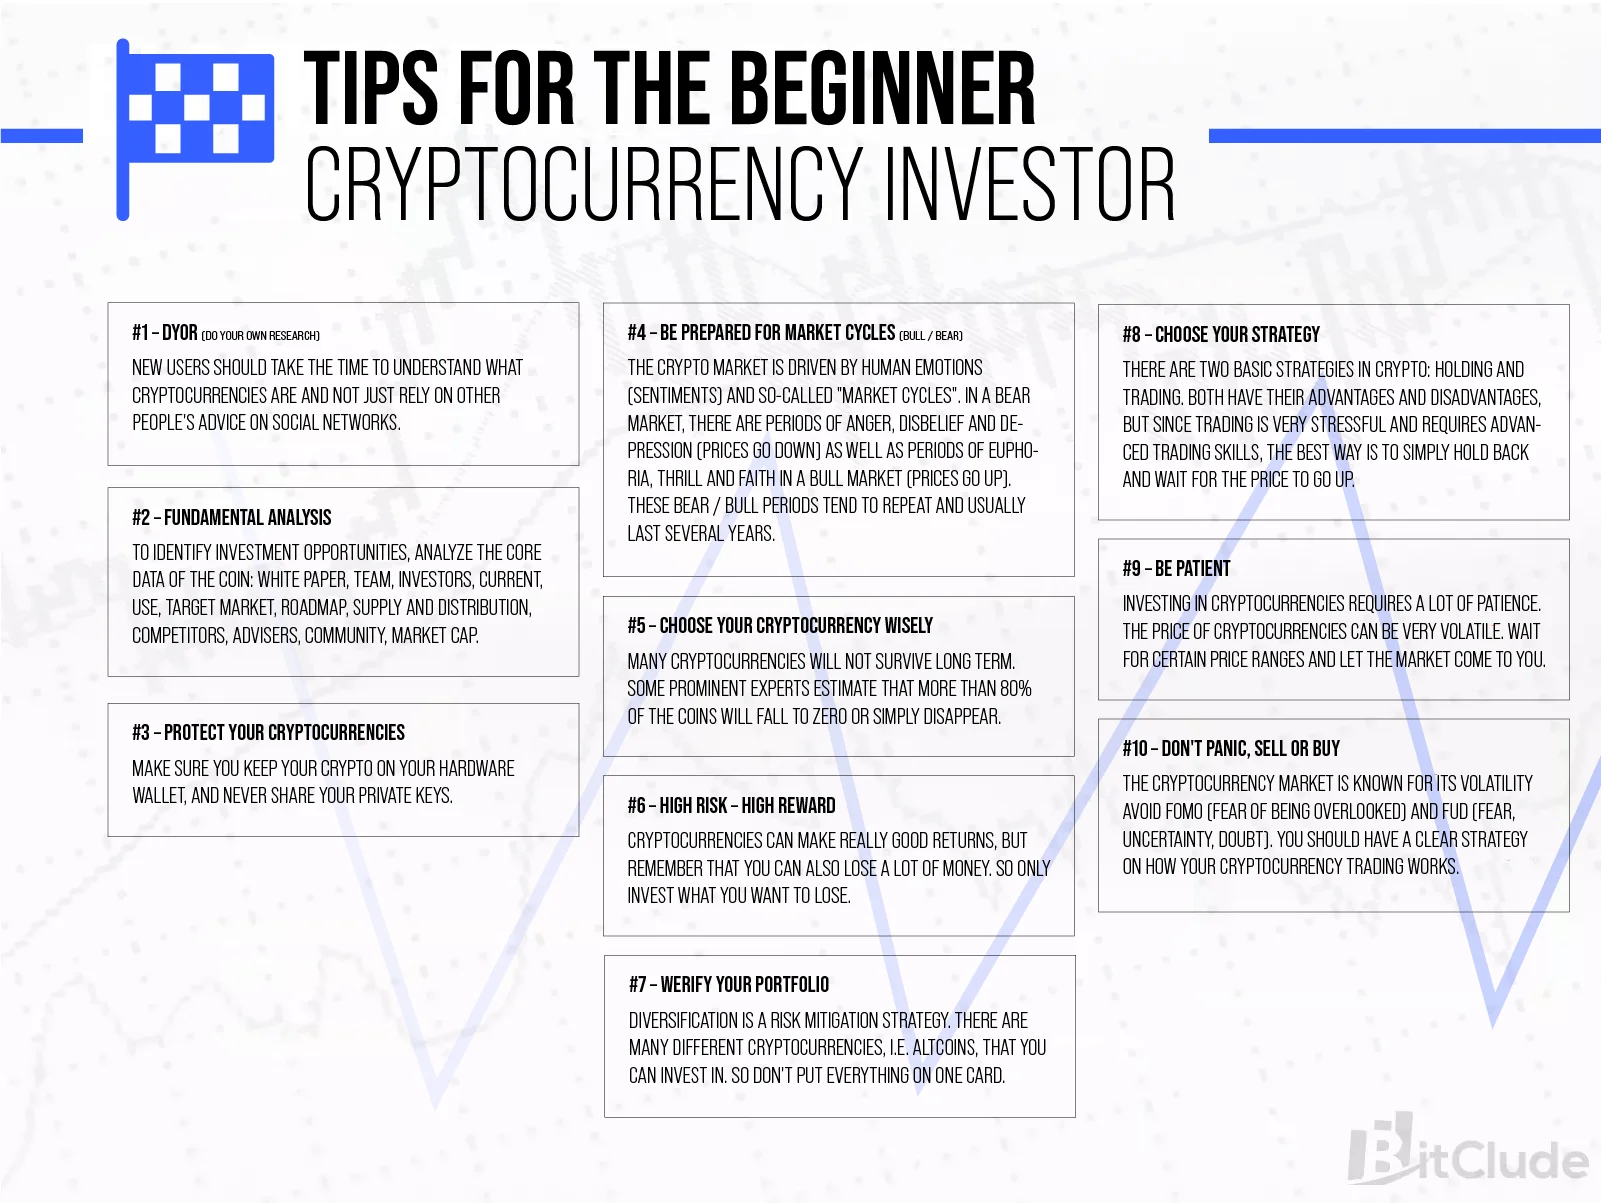 Tips for investor, who is beginning with cryptocurrencies.